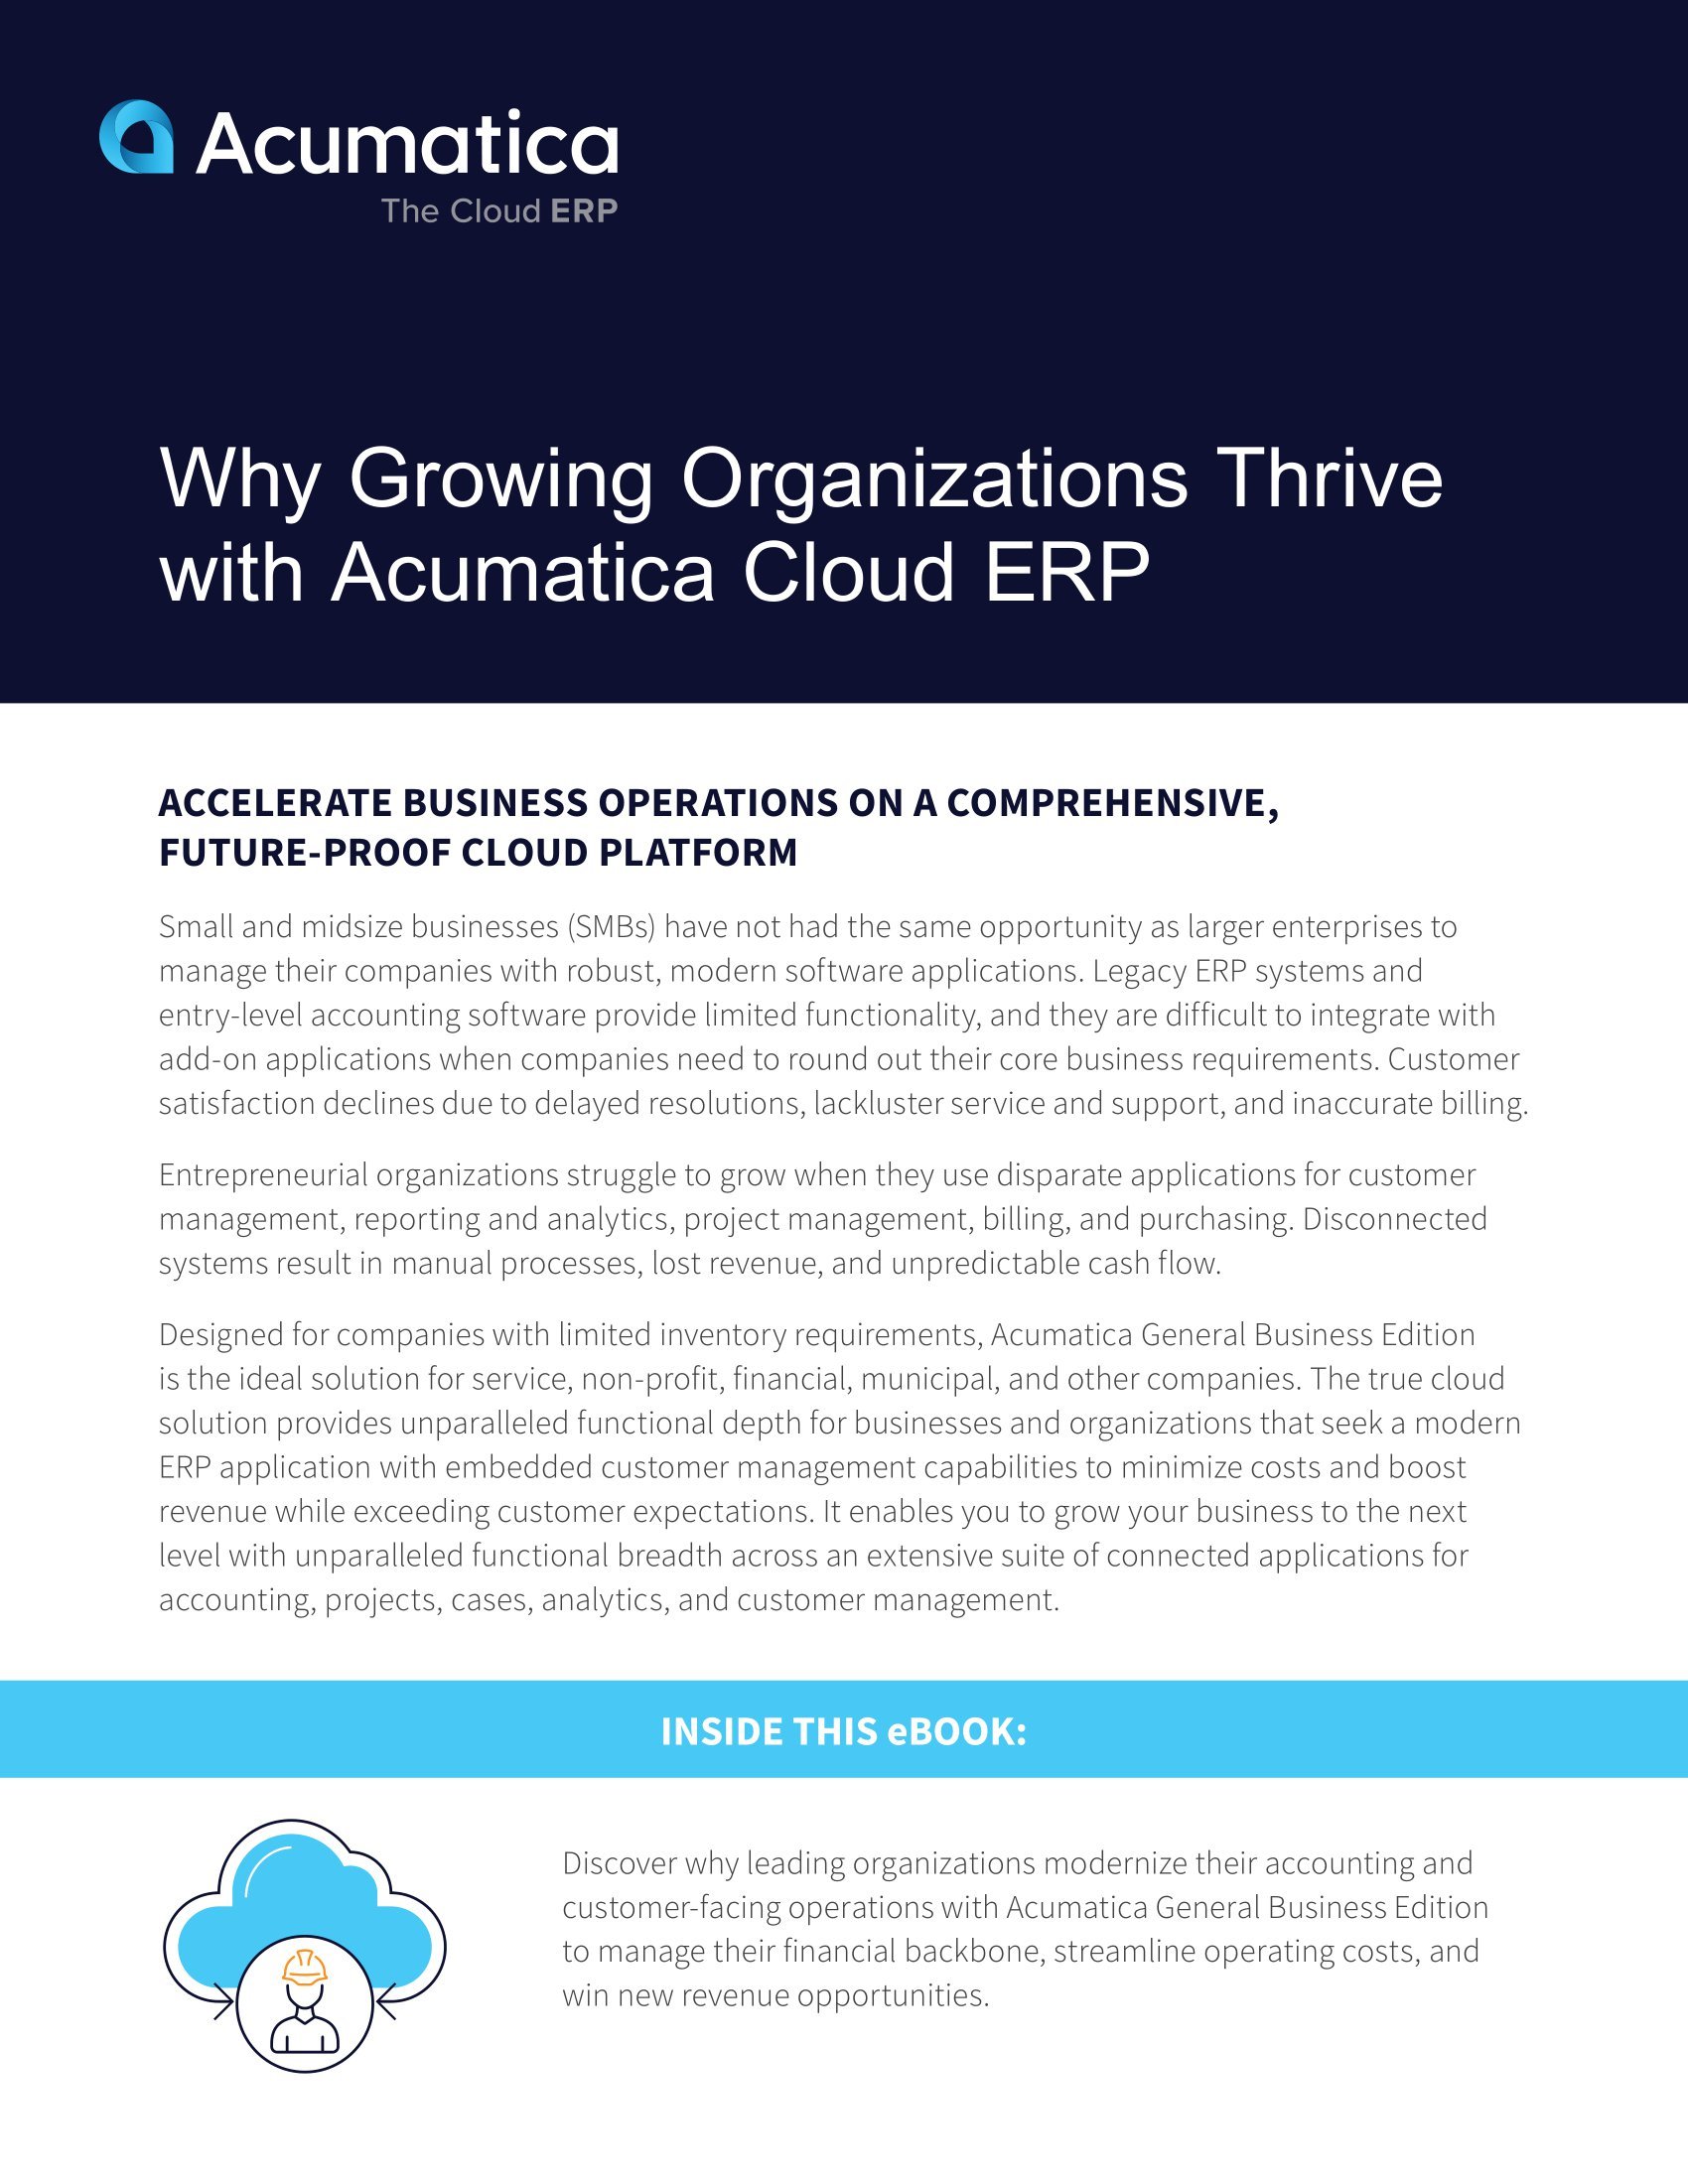 How to Grow Your Business Faster with Cloud ERP